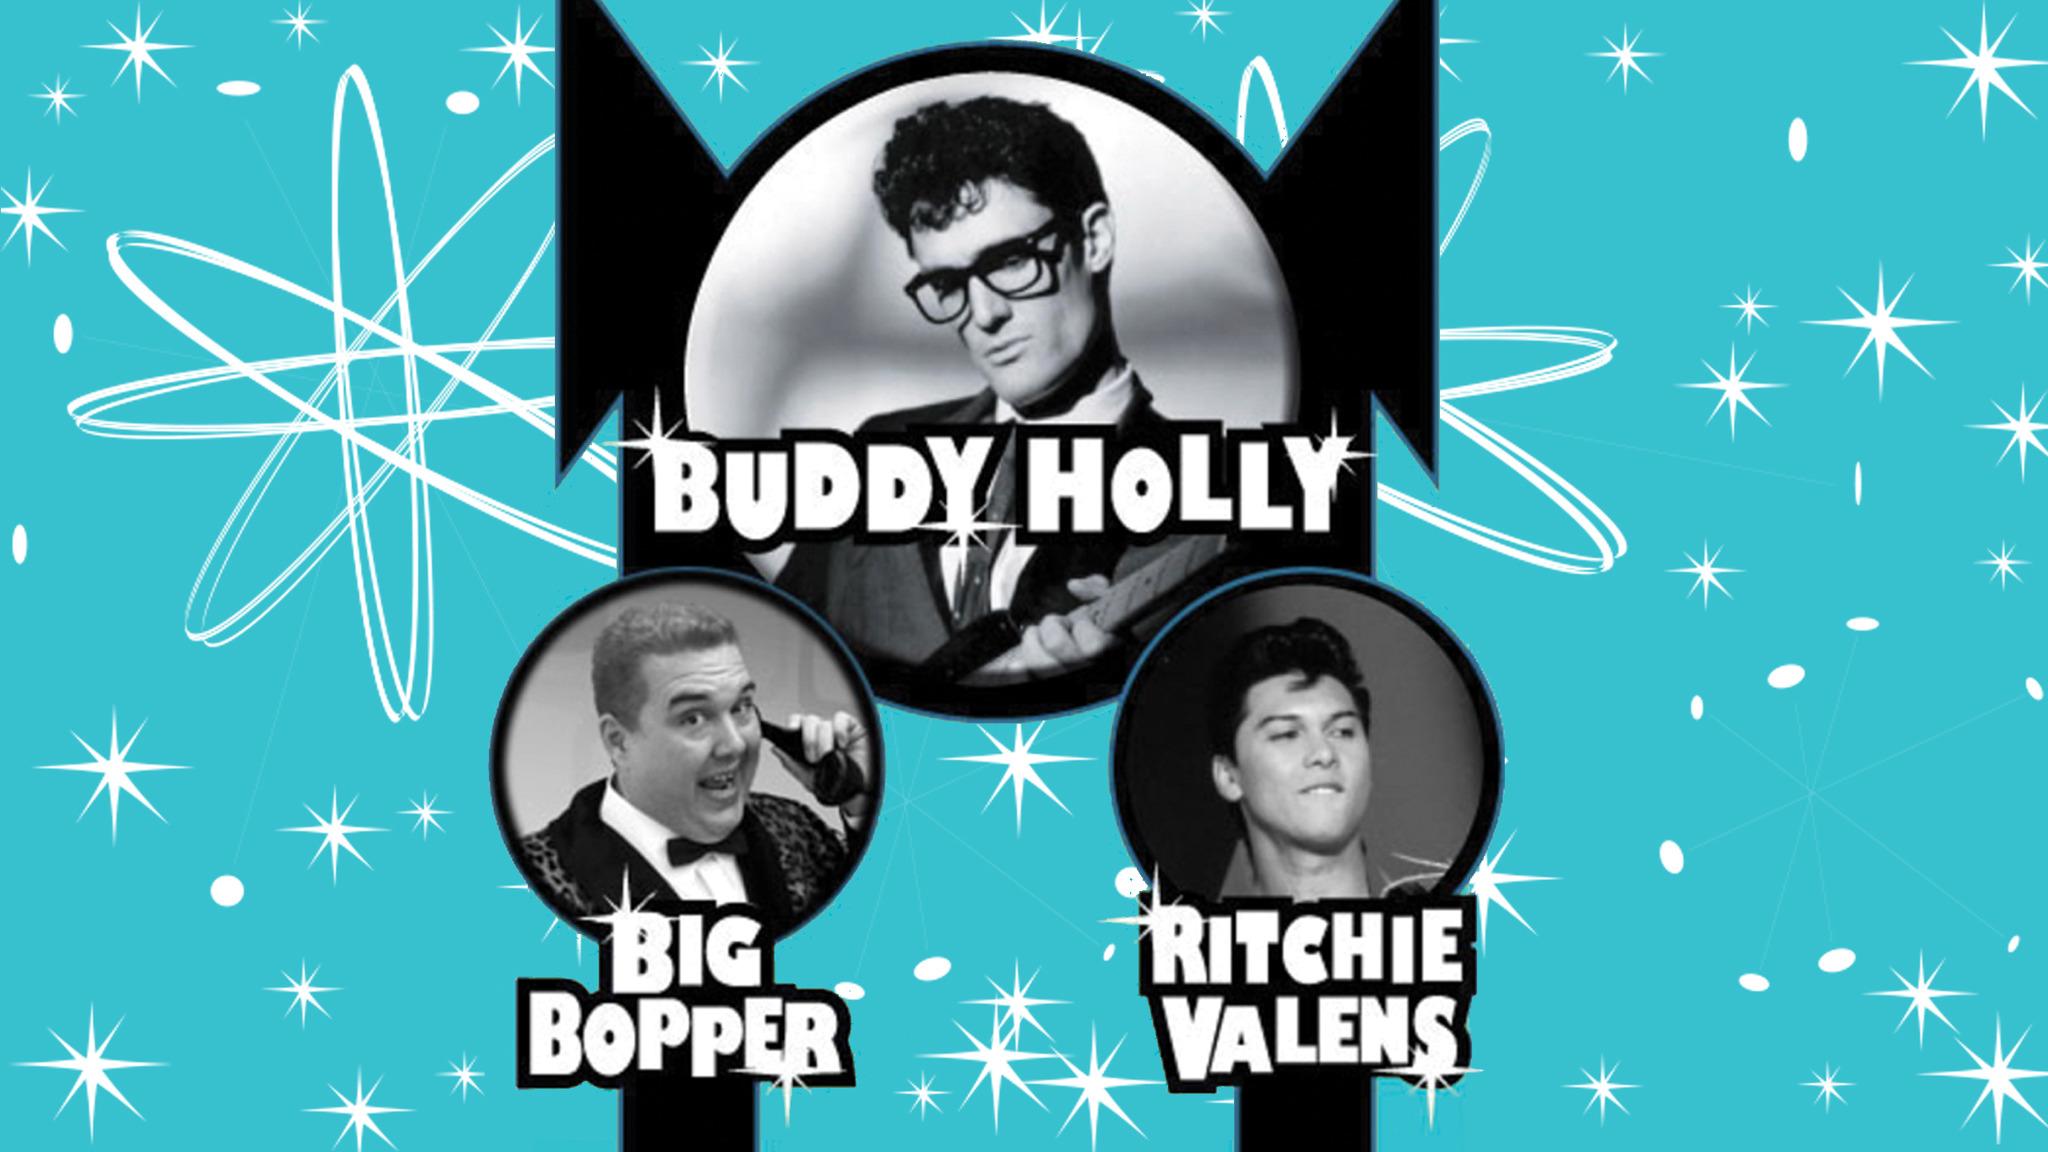 #1 Tribute to Buddy Holly, Big Bopper & Ritchie Valens